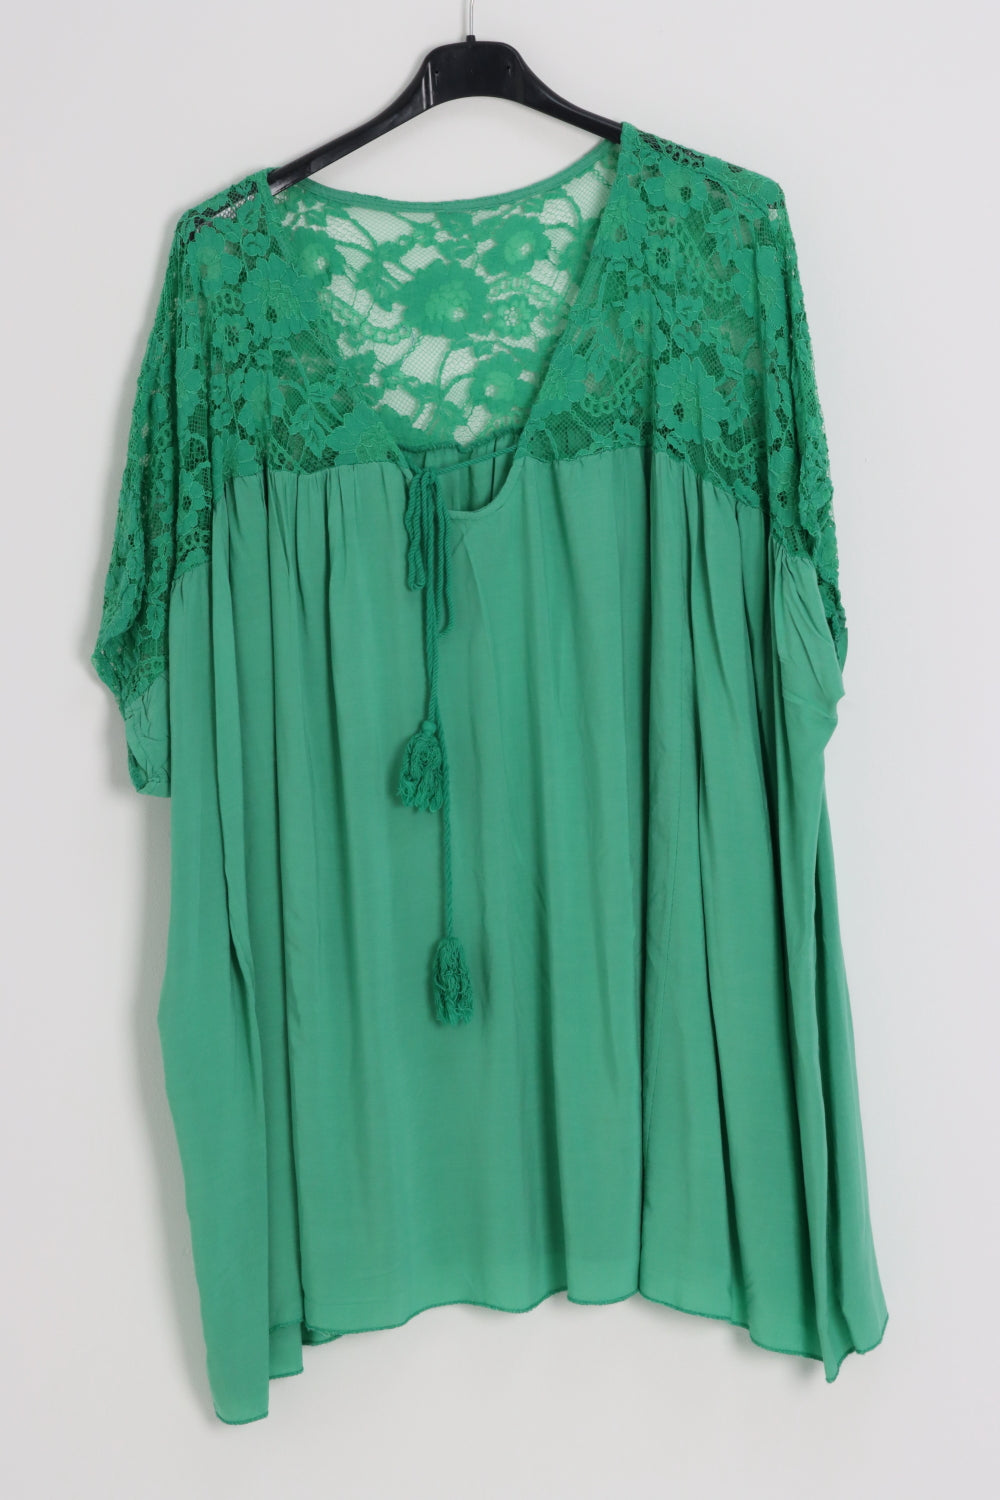 Italian Tie Front Embroidered Tunic Top